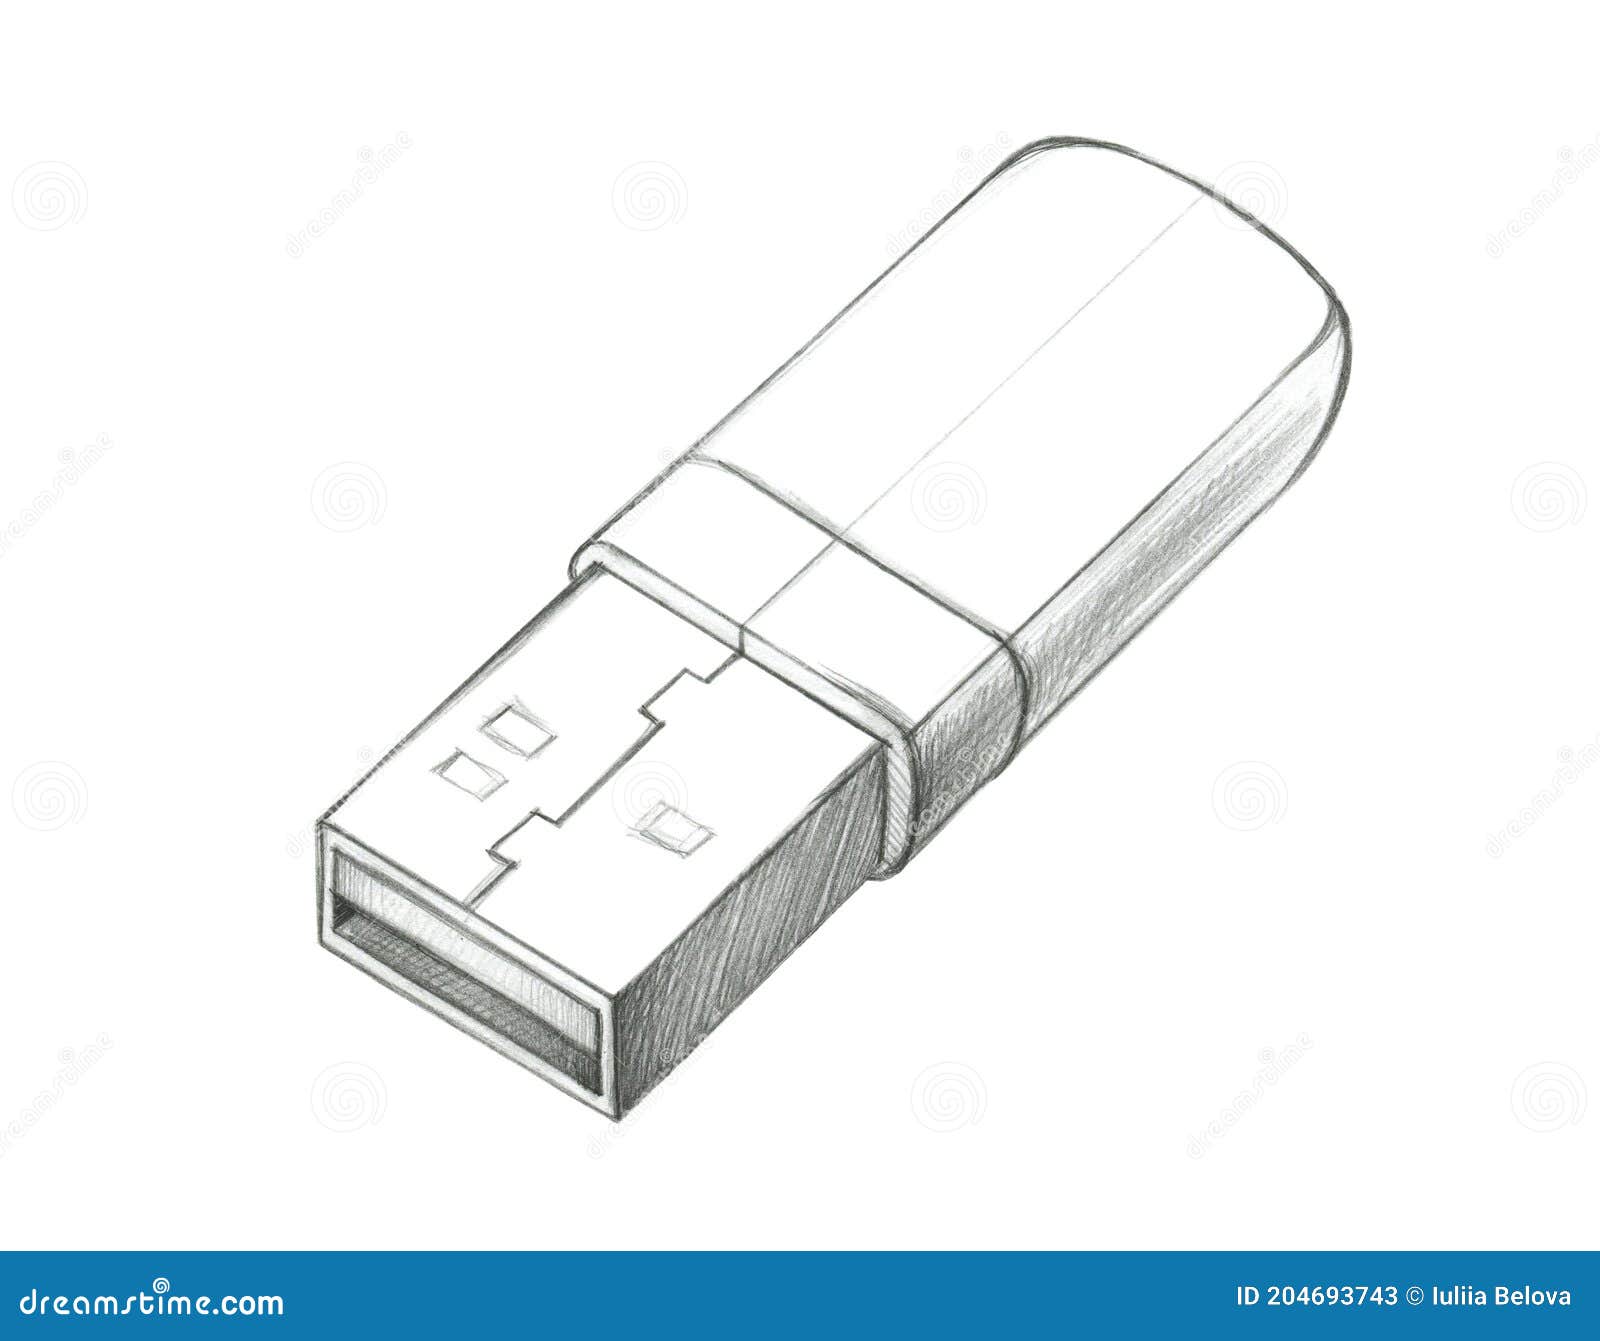 Usb flash drive with cap outline drawing Vector Image